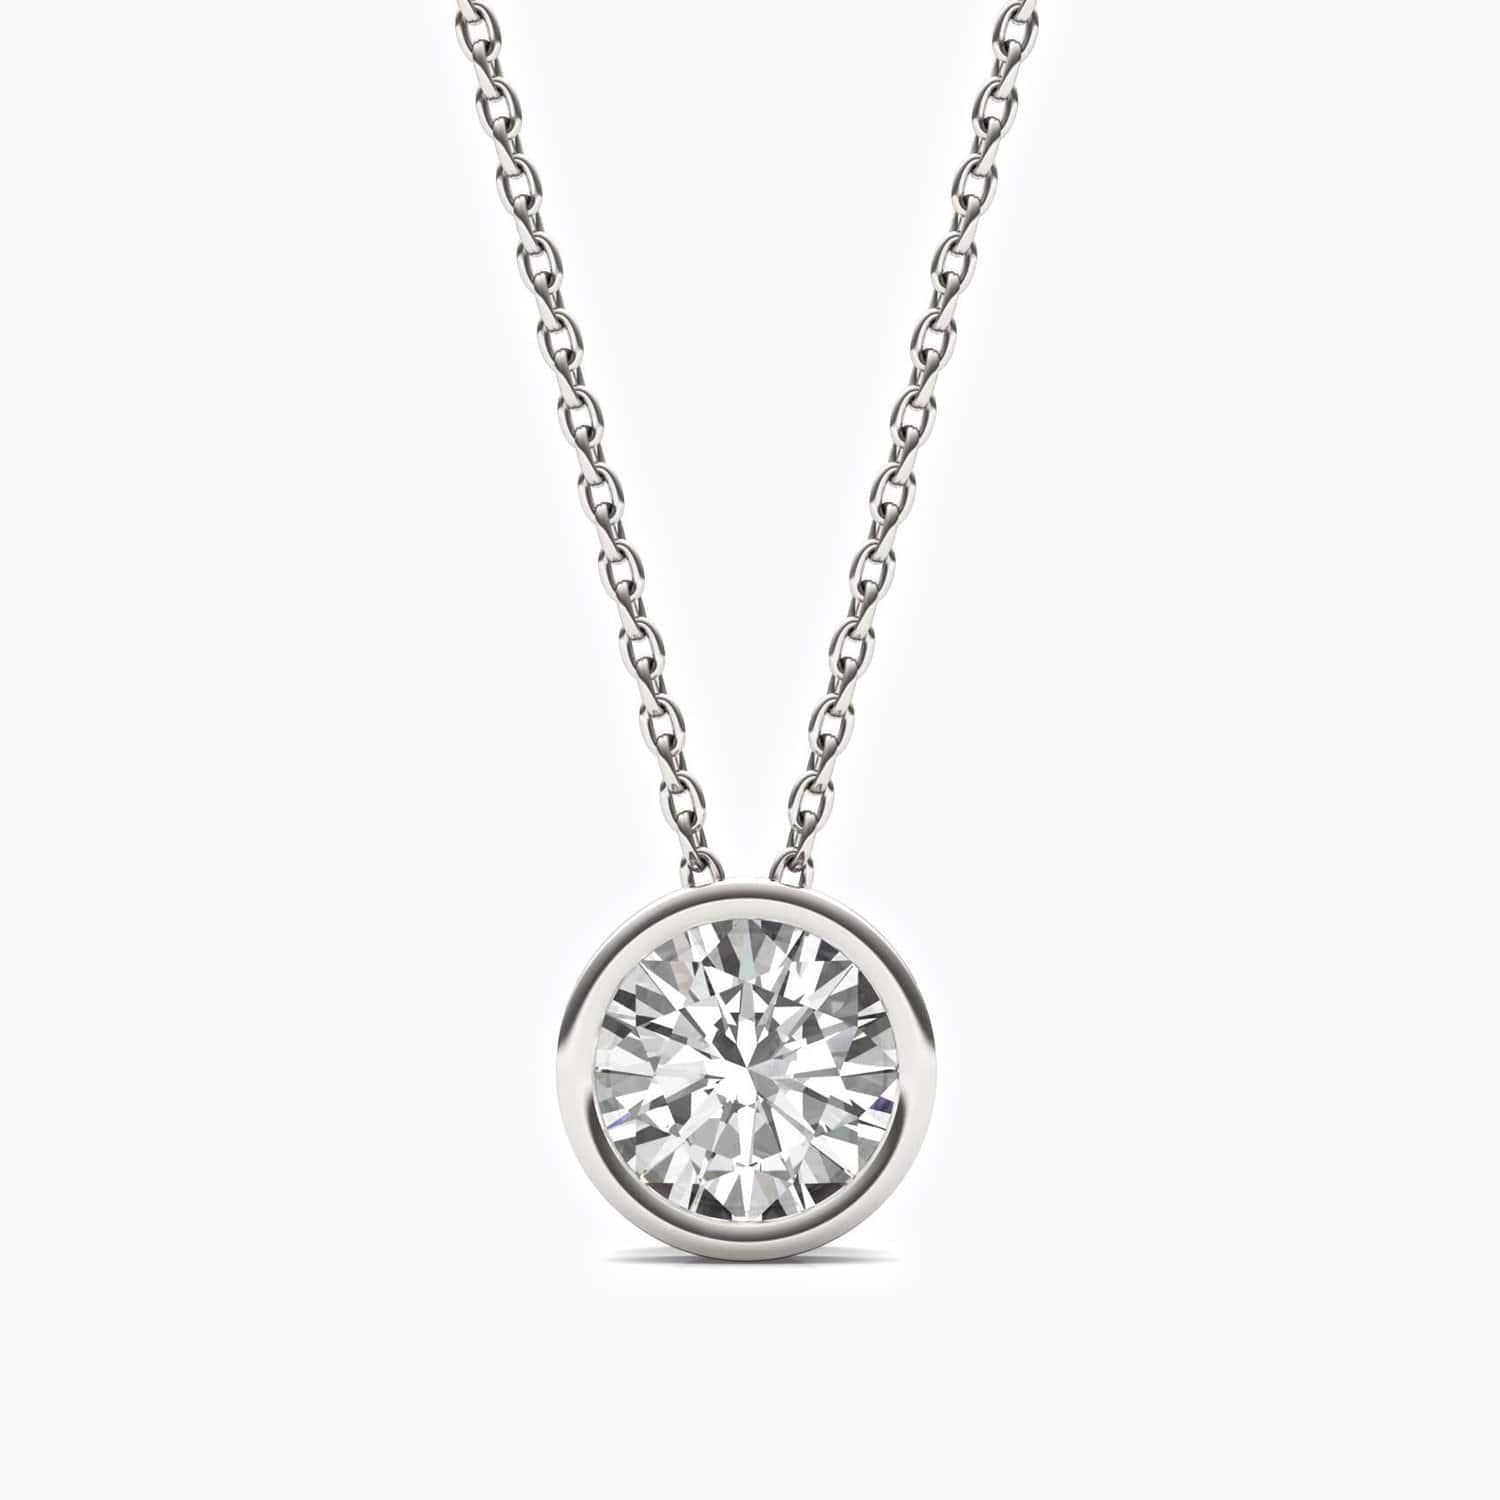 Moissanite Necklace With Bezel Set Round Solitaire Pendant Sterling Silver 1 Carat